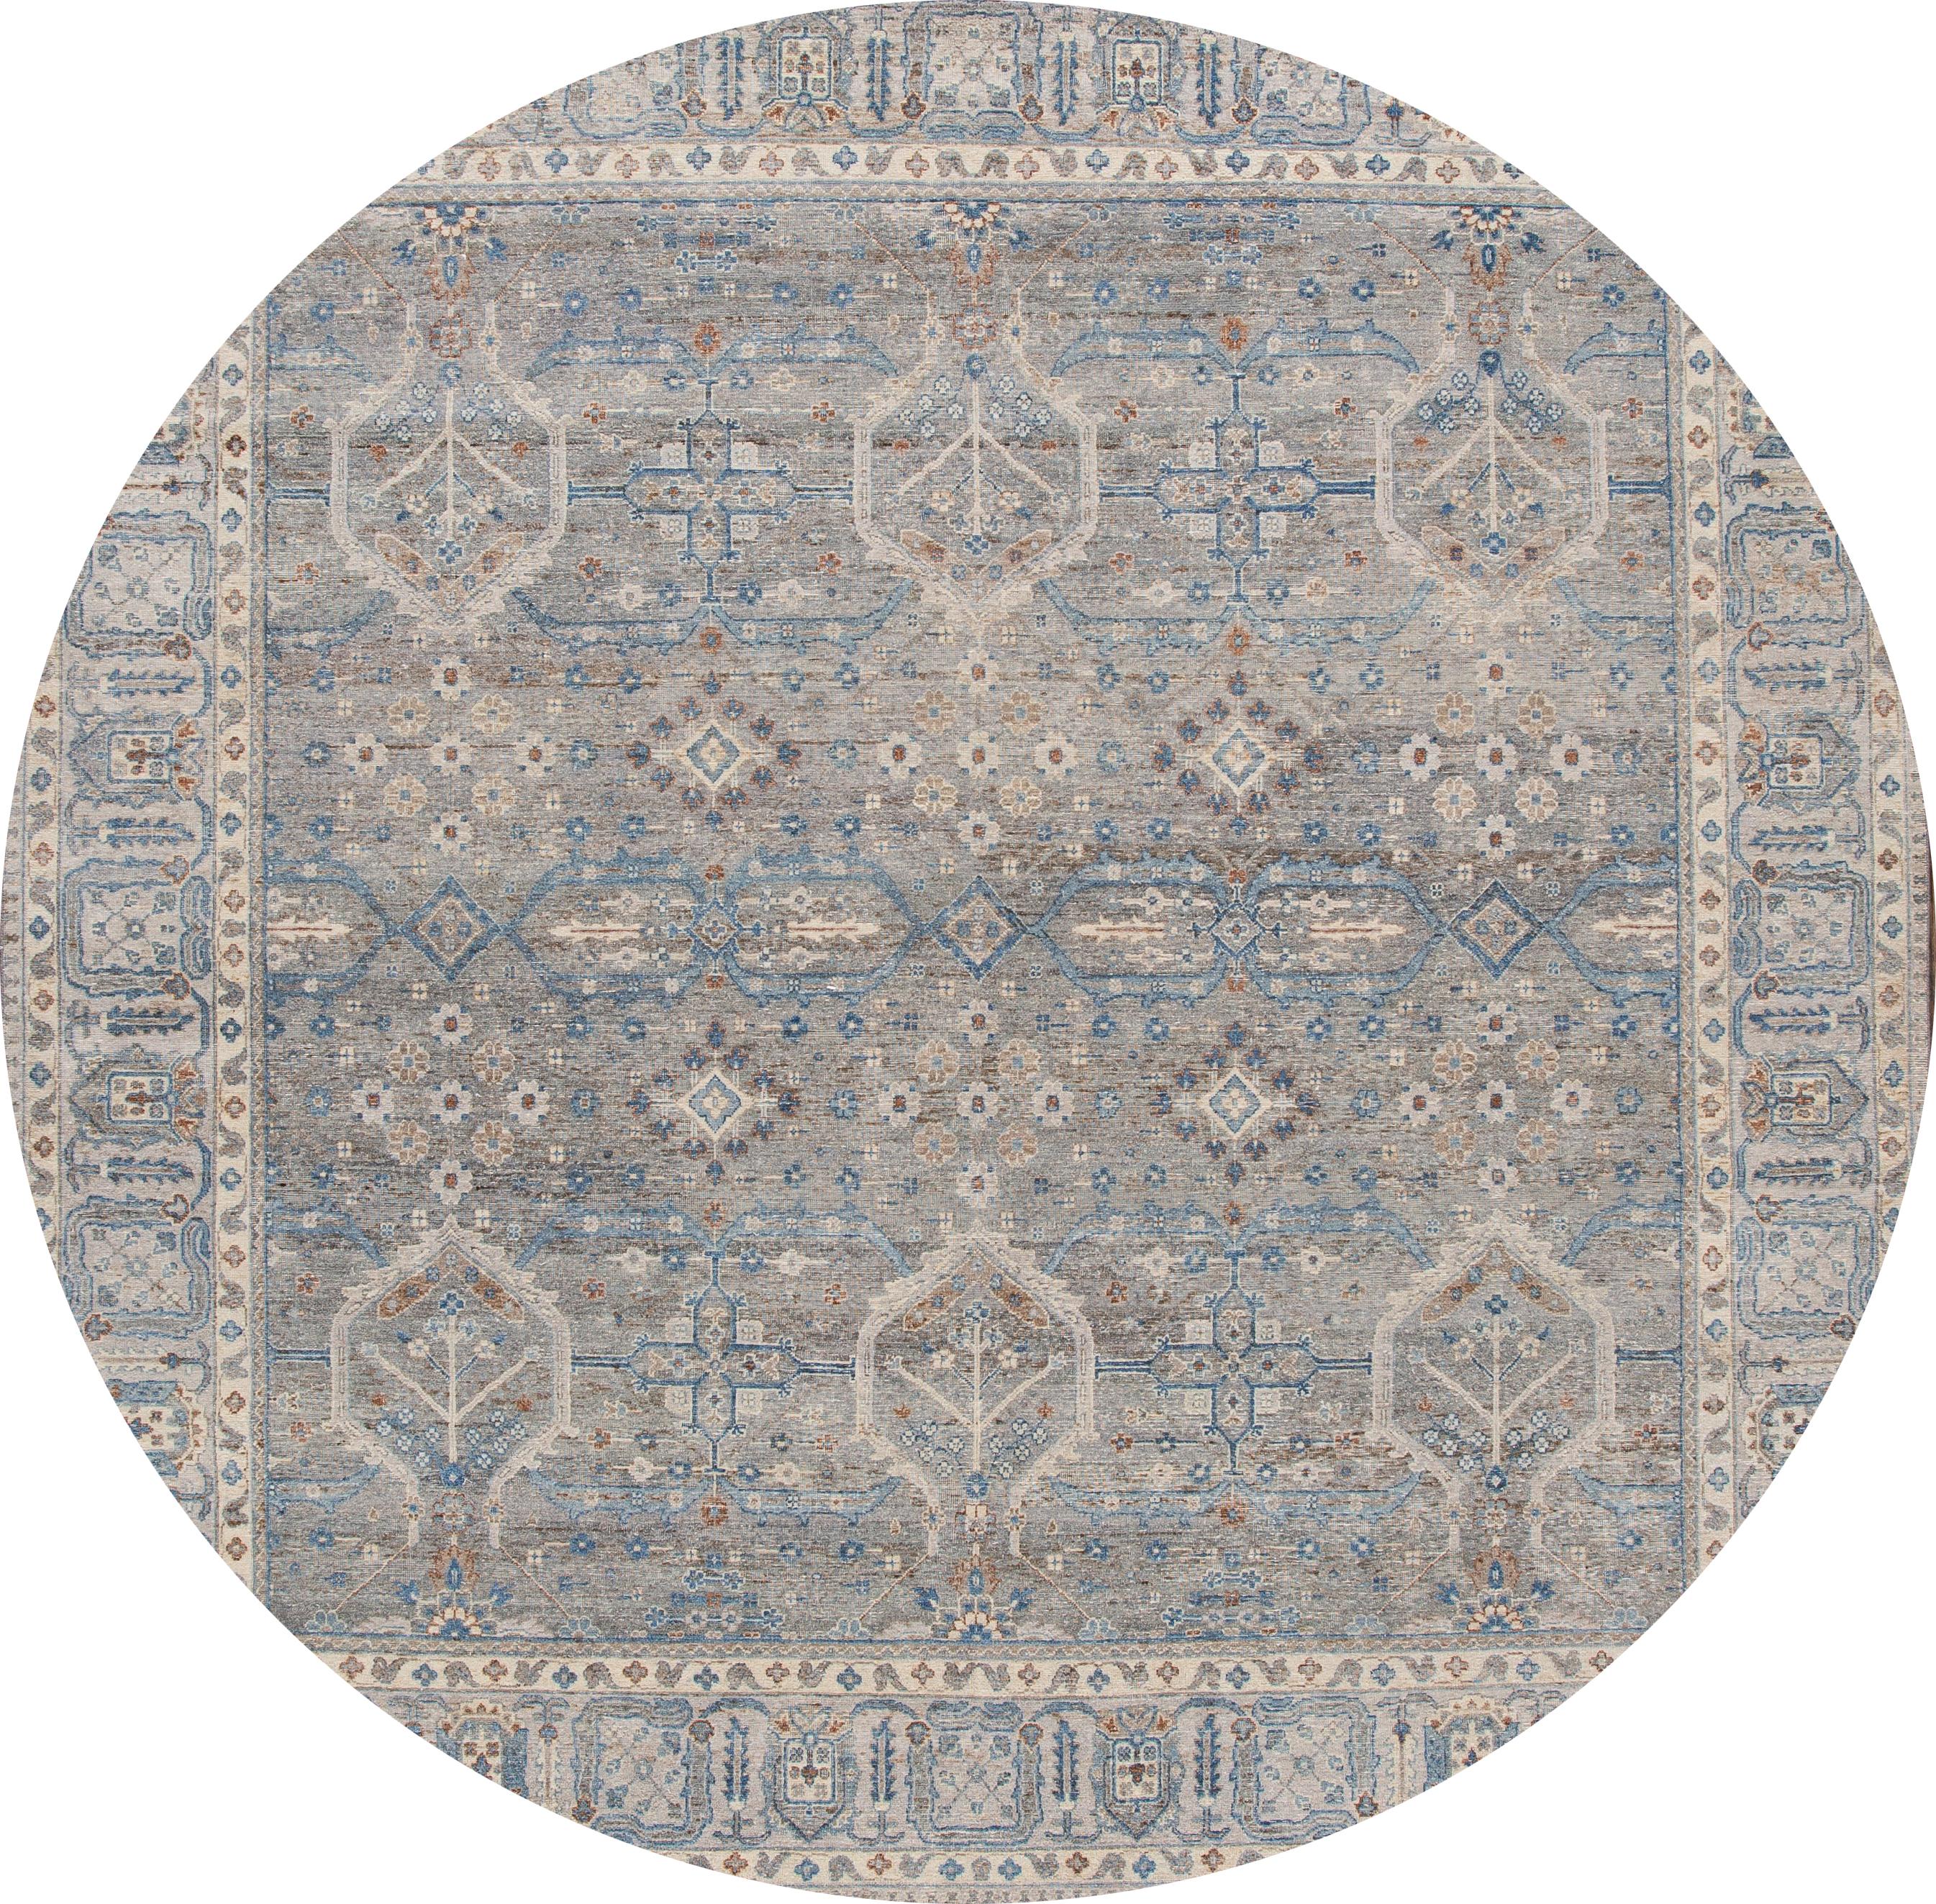 A contemporary square Tabriz-style rug with a gray field, and ivory and blue accents in asymmetrical, interconnected floral and vine design. This hand knotted Square wool.
This rug measures 10'1” x 10'4”.